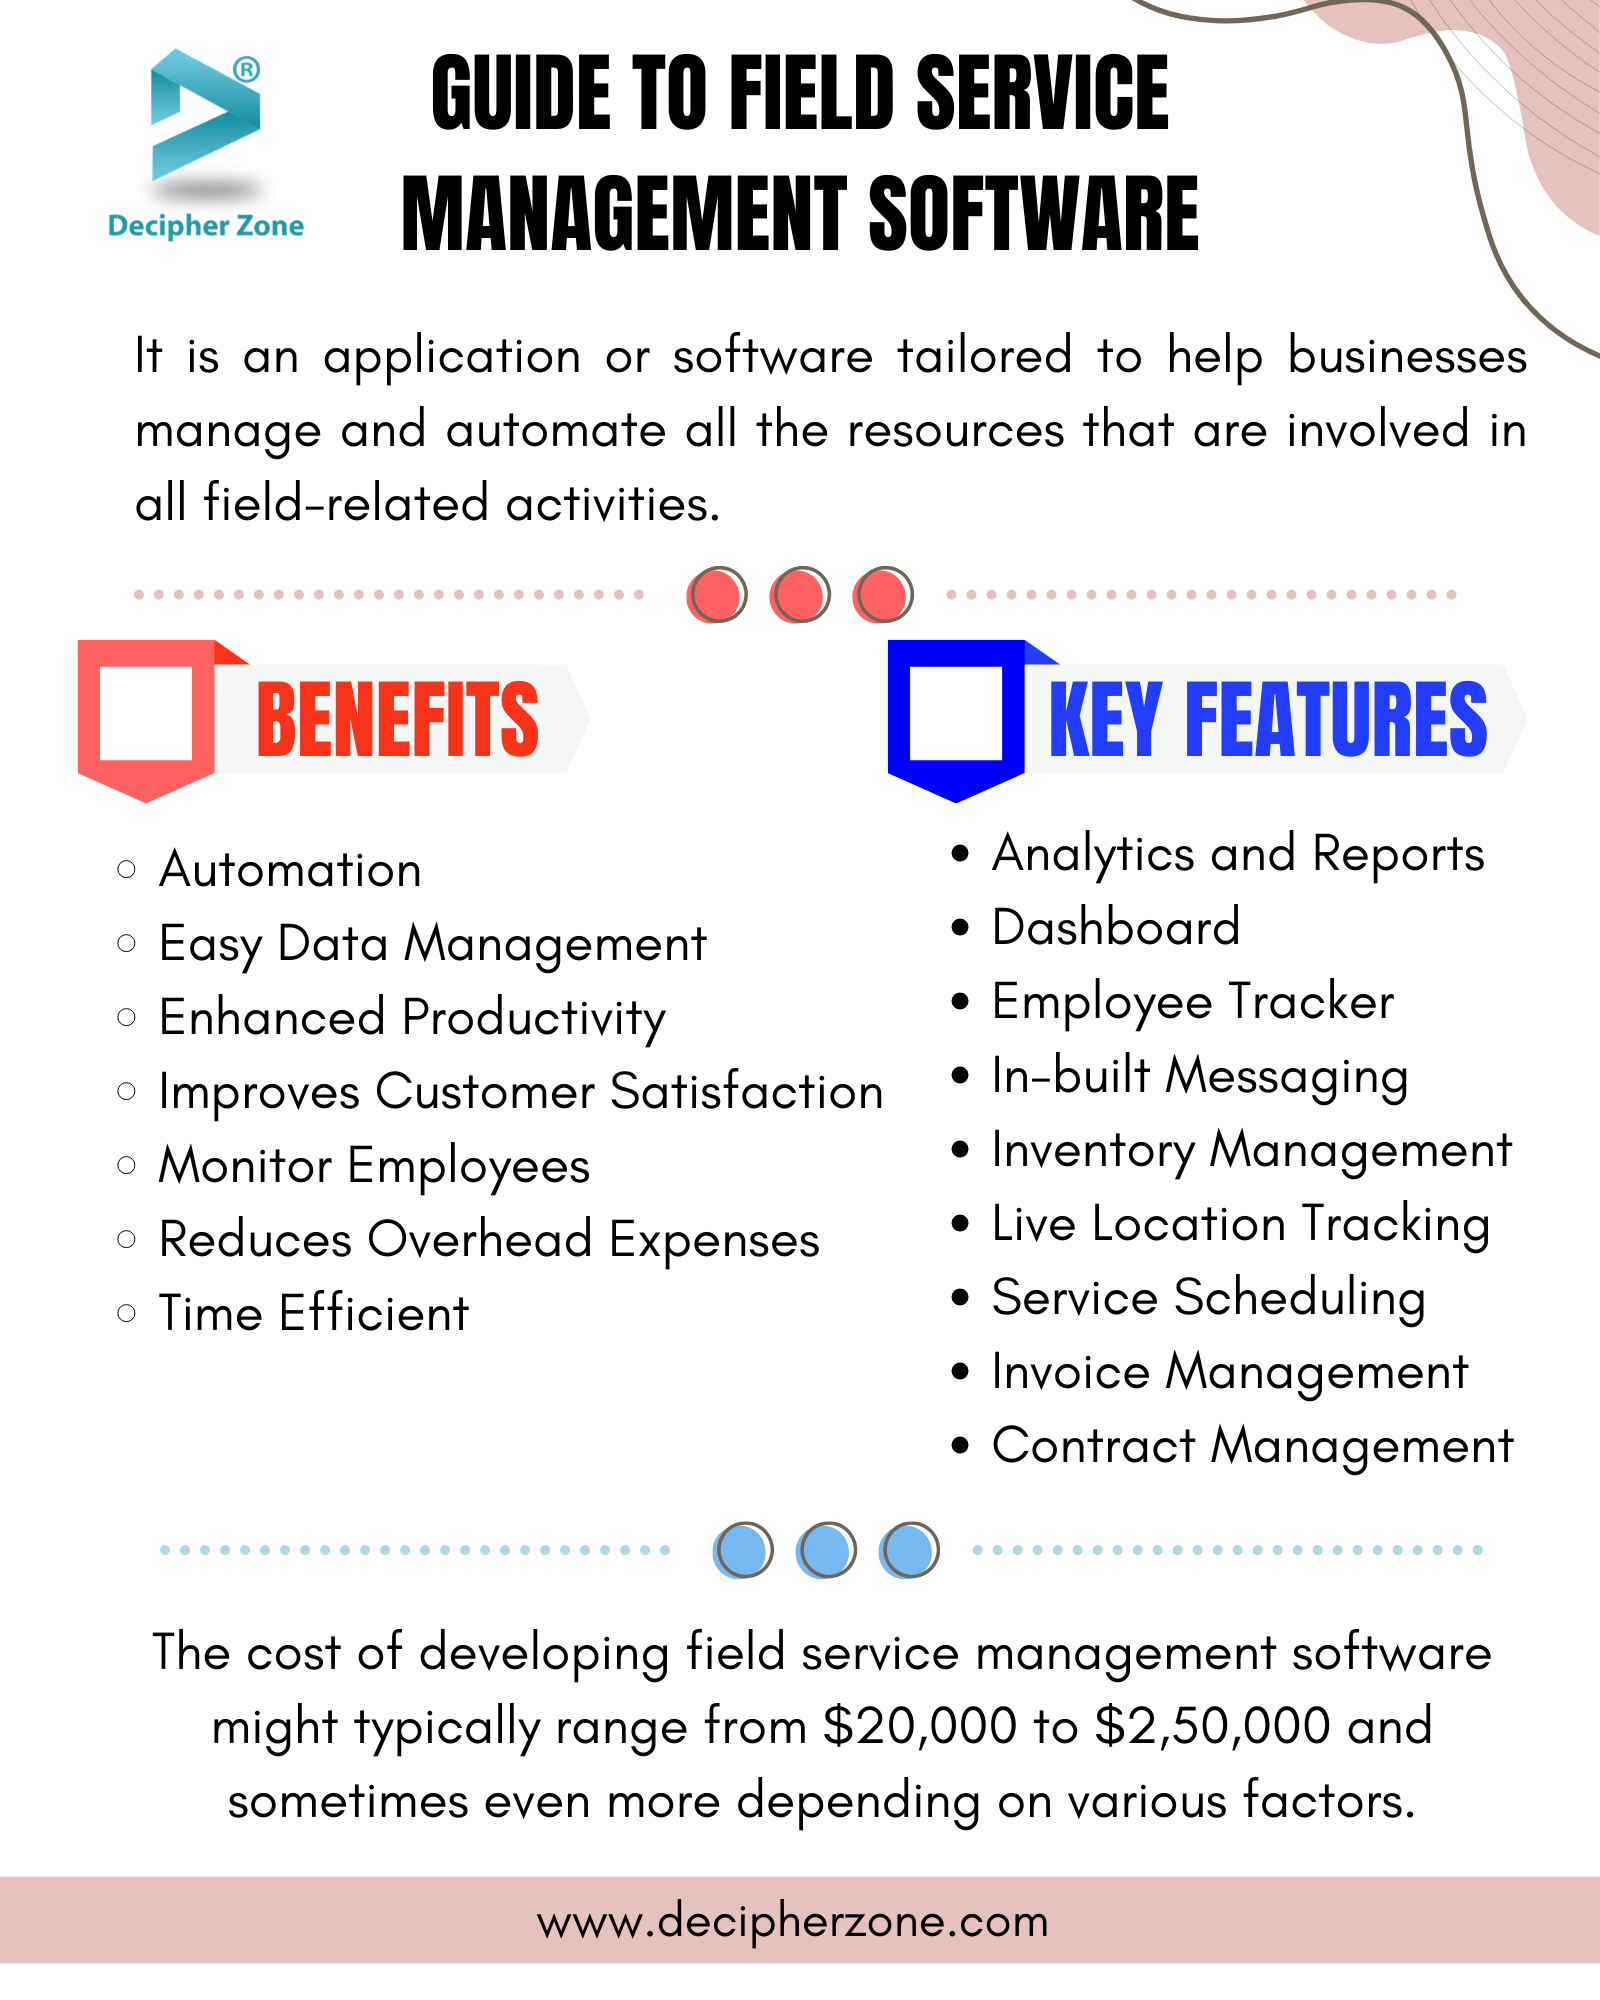 Guide to Field Service Management Software Development